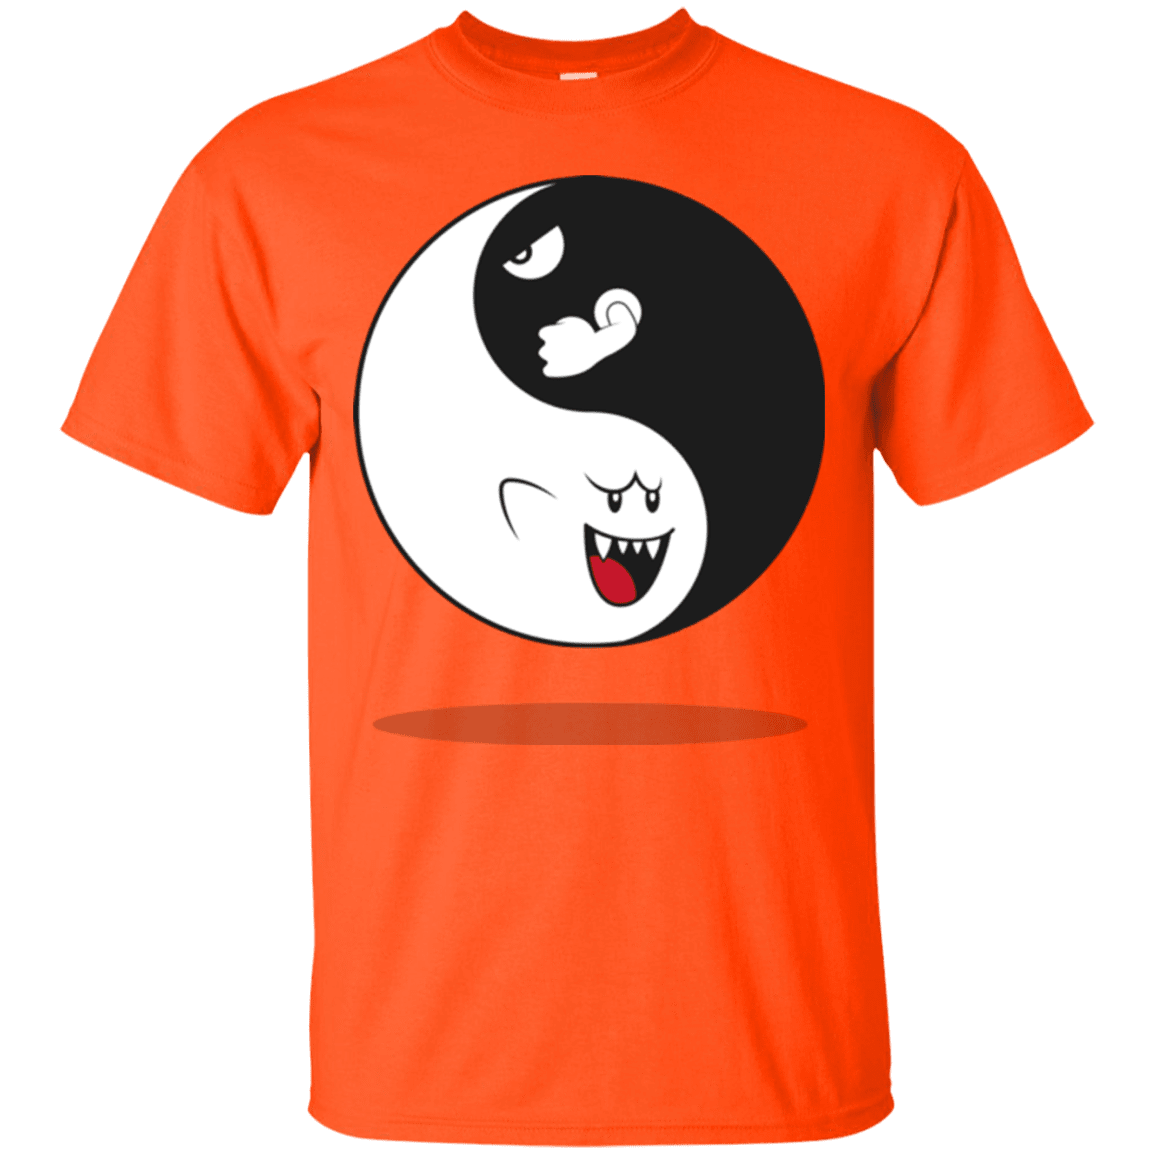 T-Shirts Orange / Small Shy and angry T-Shirt